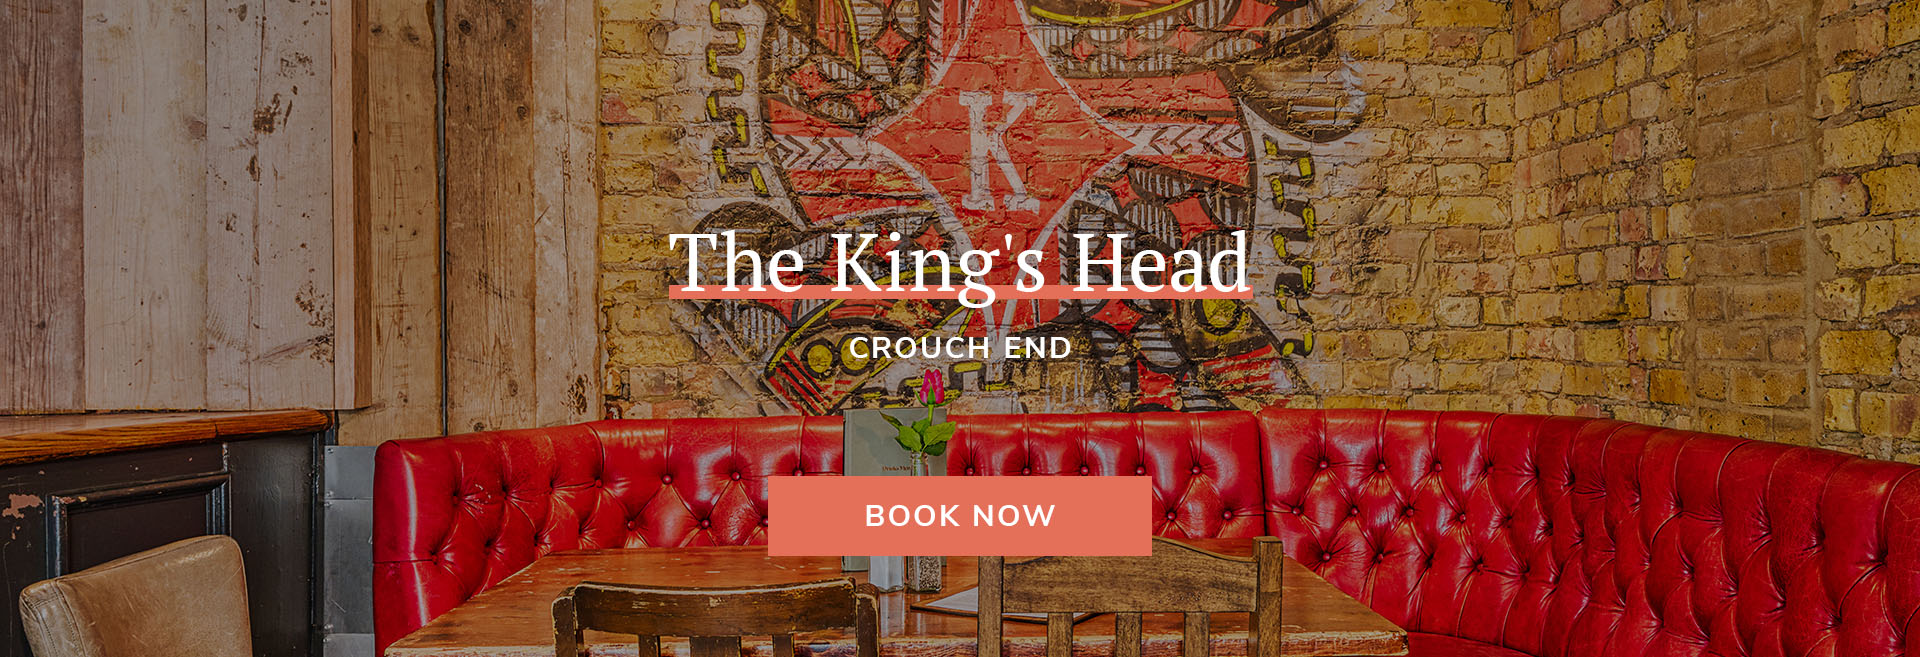 The King's Head Banner 3